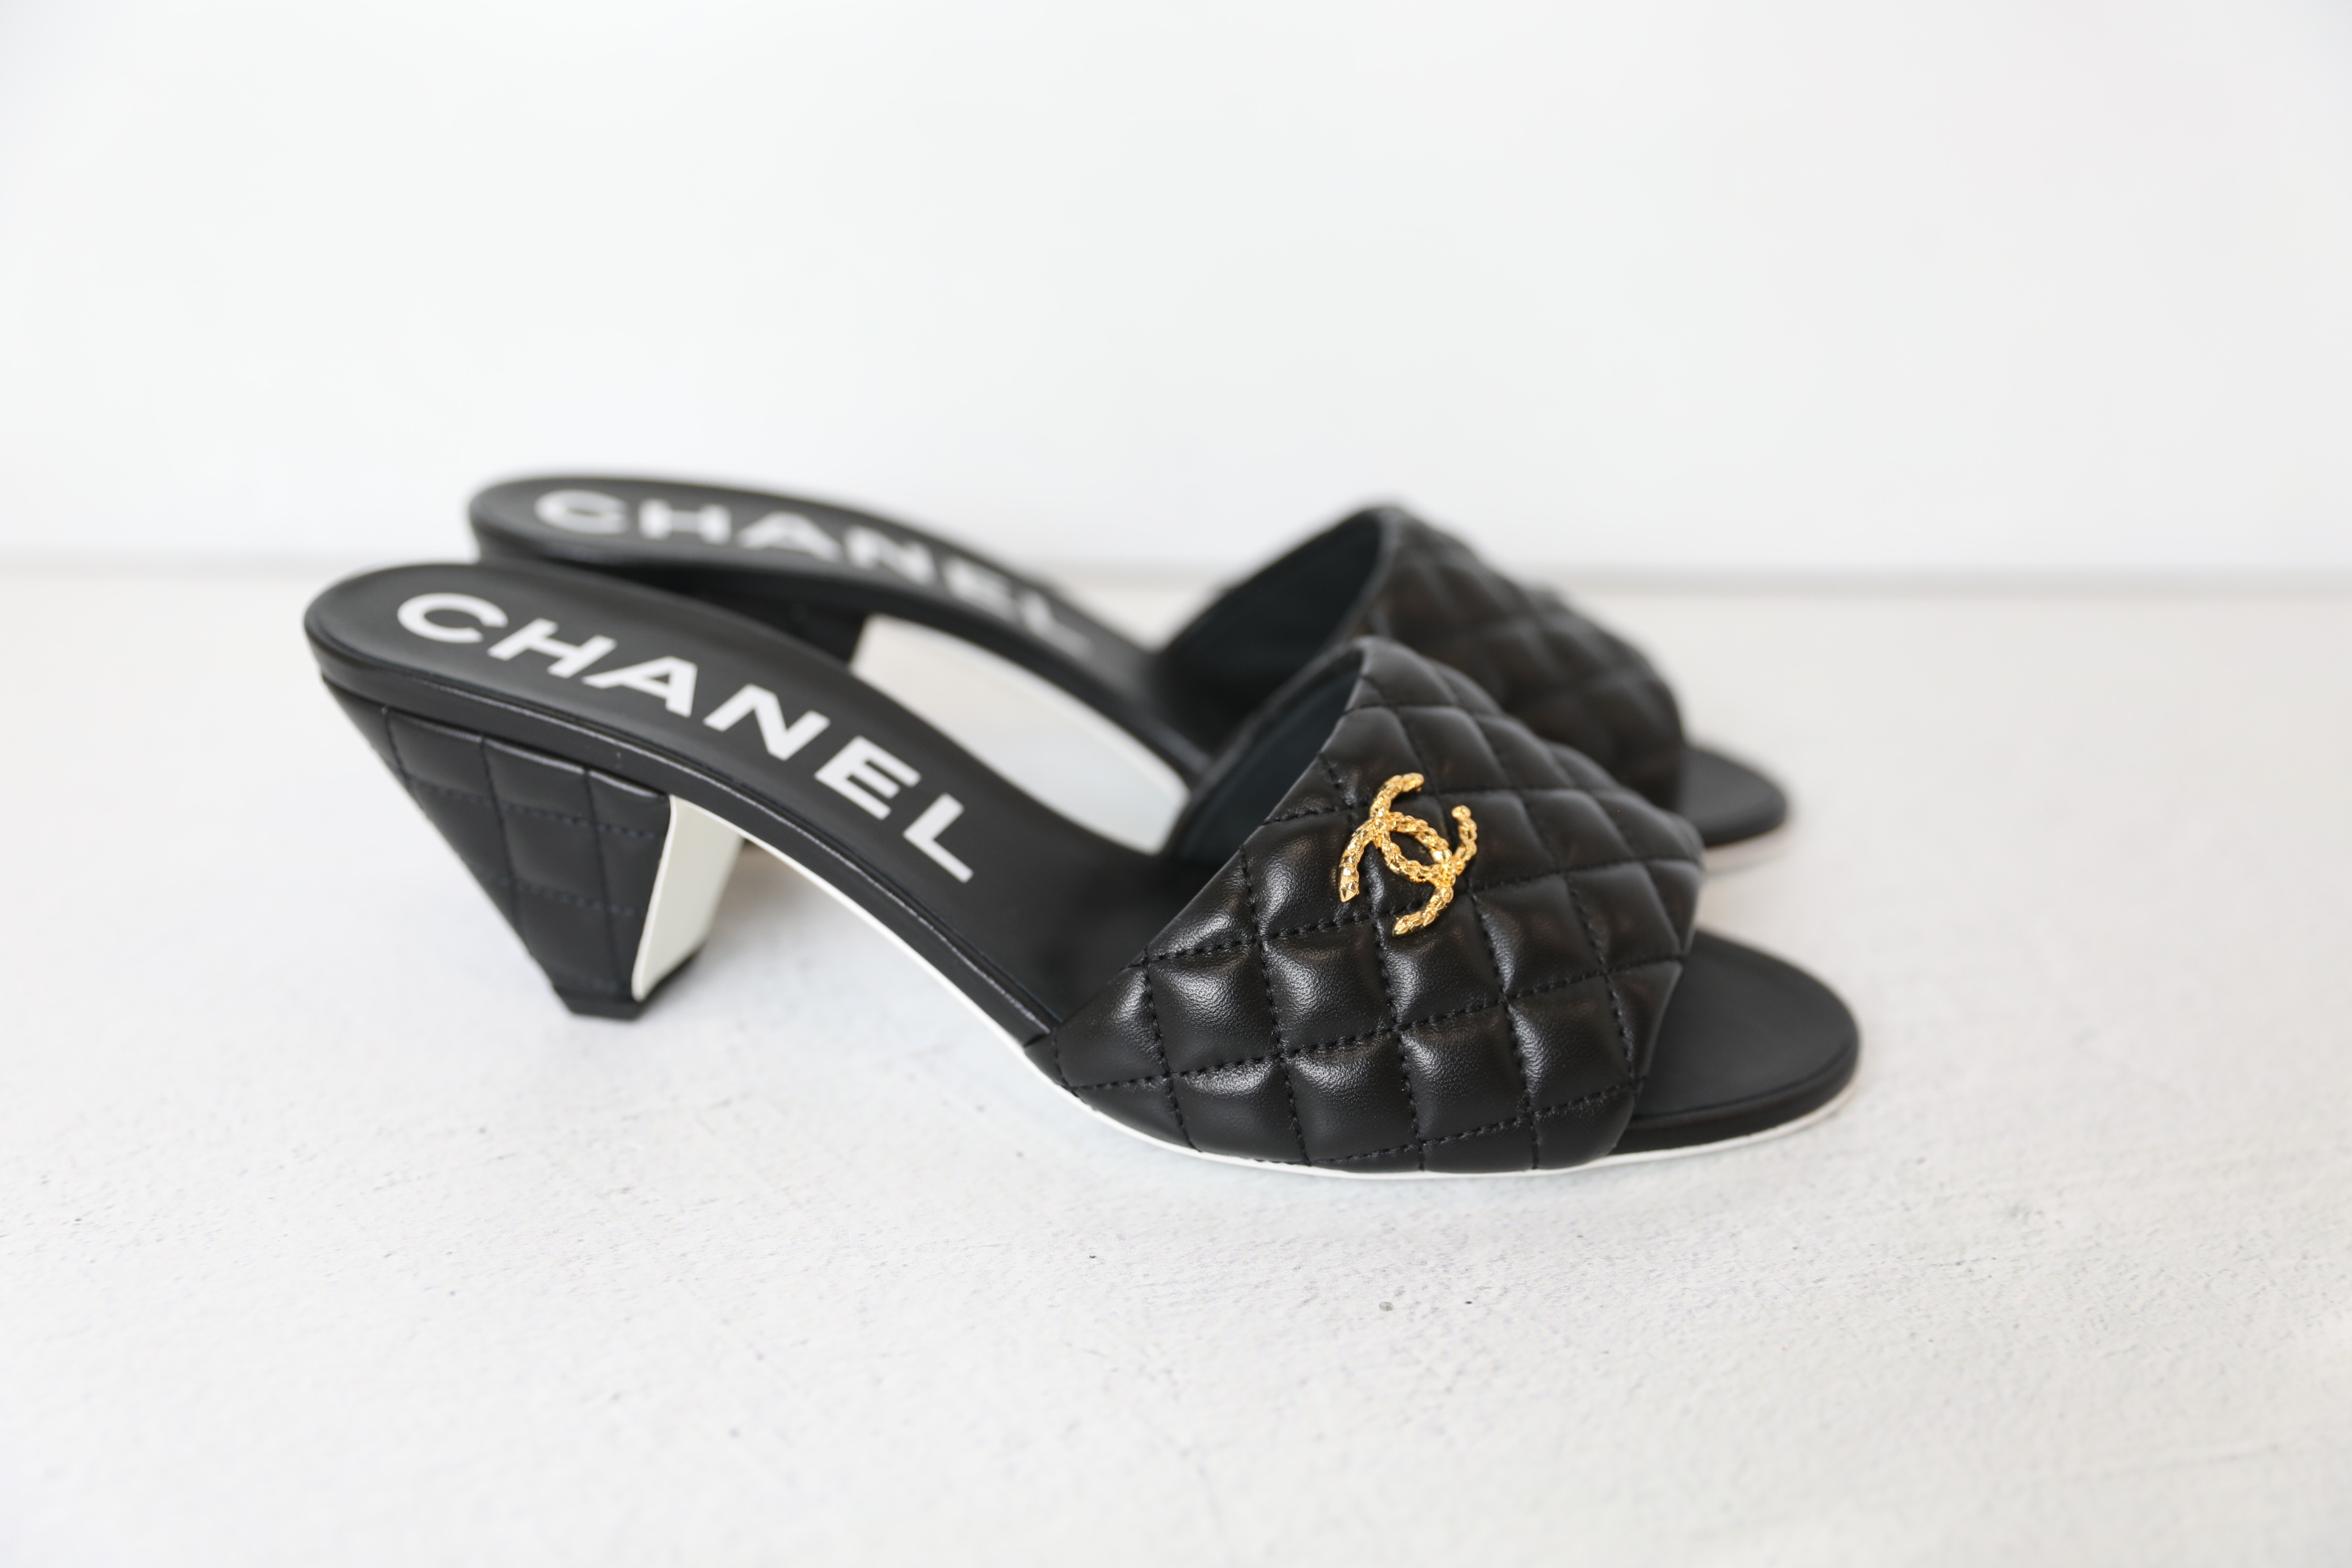 Chanel Shoes Quilted Mules with Mid Heel, Black, Size 42, New in Box WA001